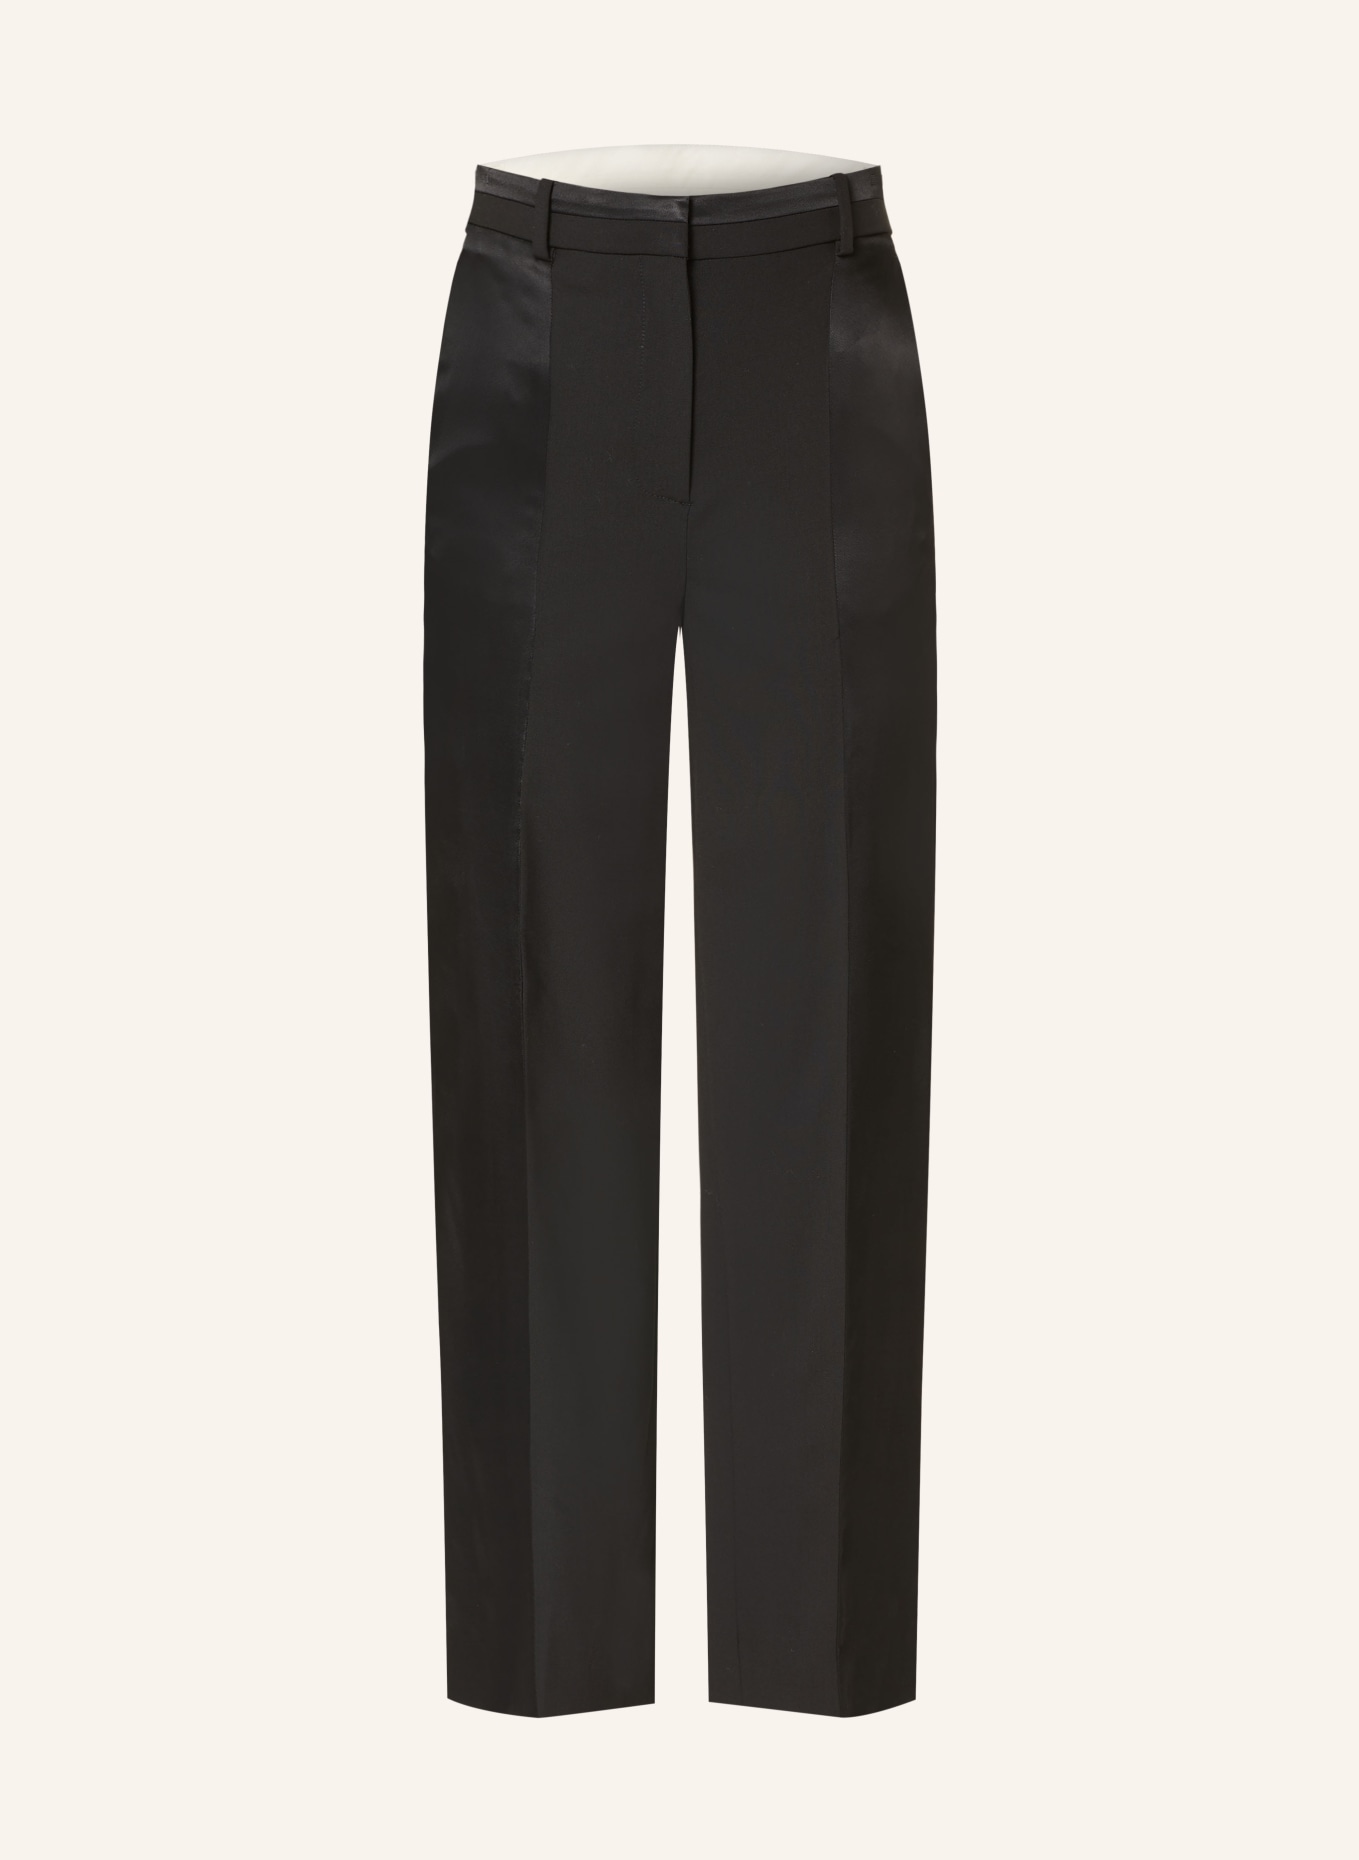 WIDE-LEG TAILORED WOOL-BLEND TROUSERS - GREY - COS